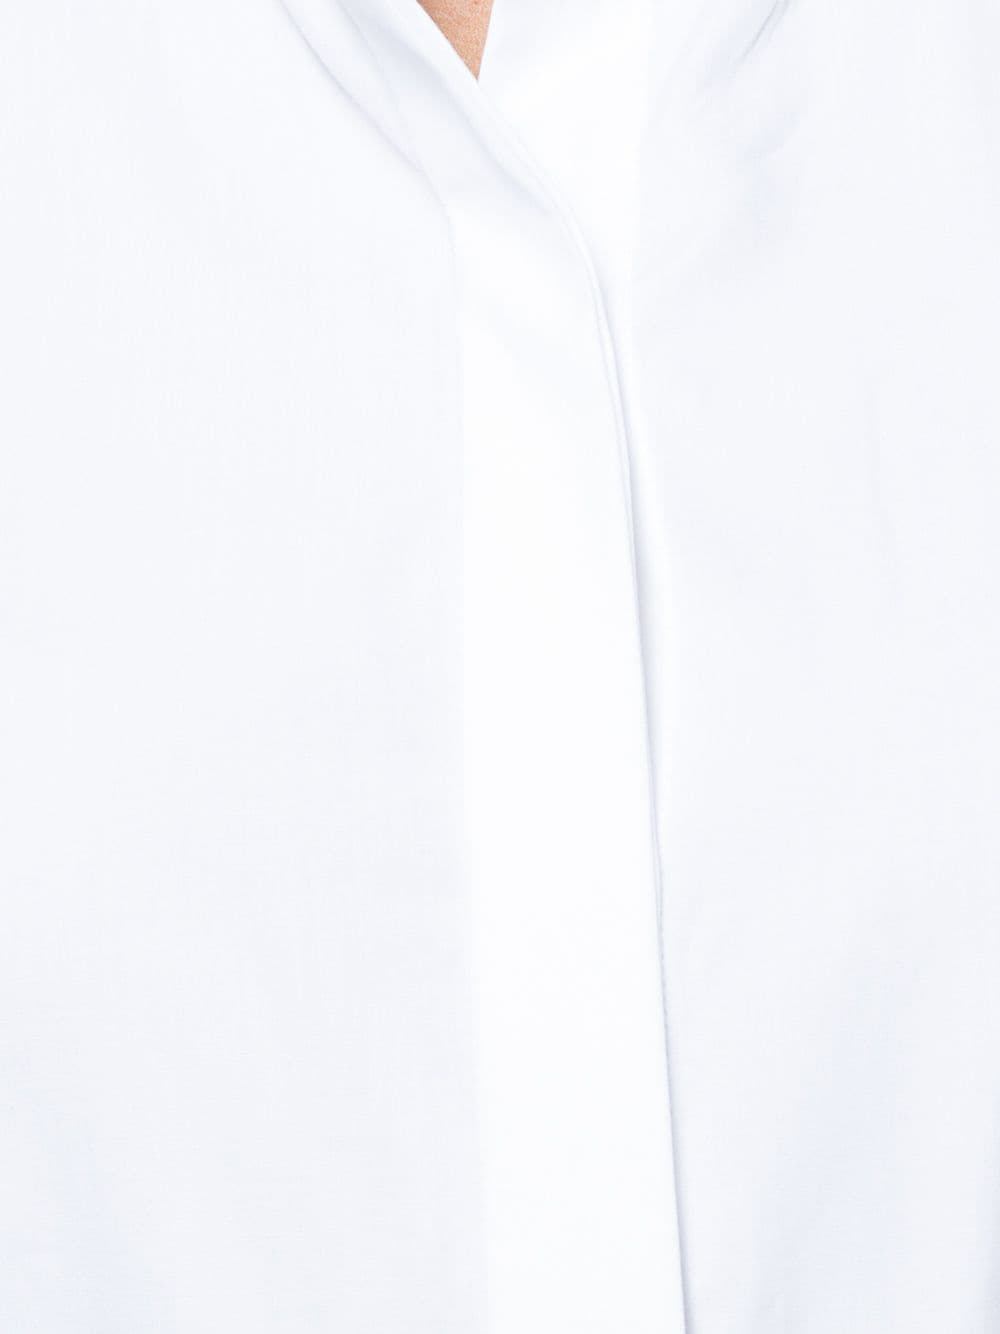 Shop white Helmut Lang oversized collar shirt with Express Delivery ...